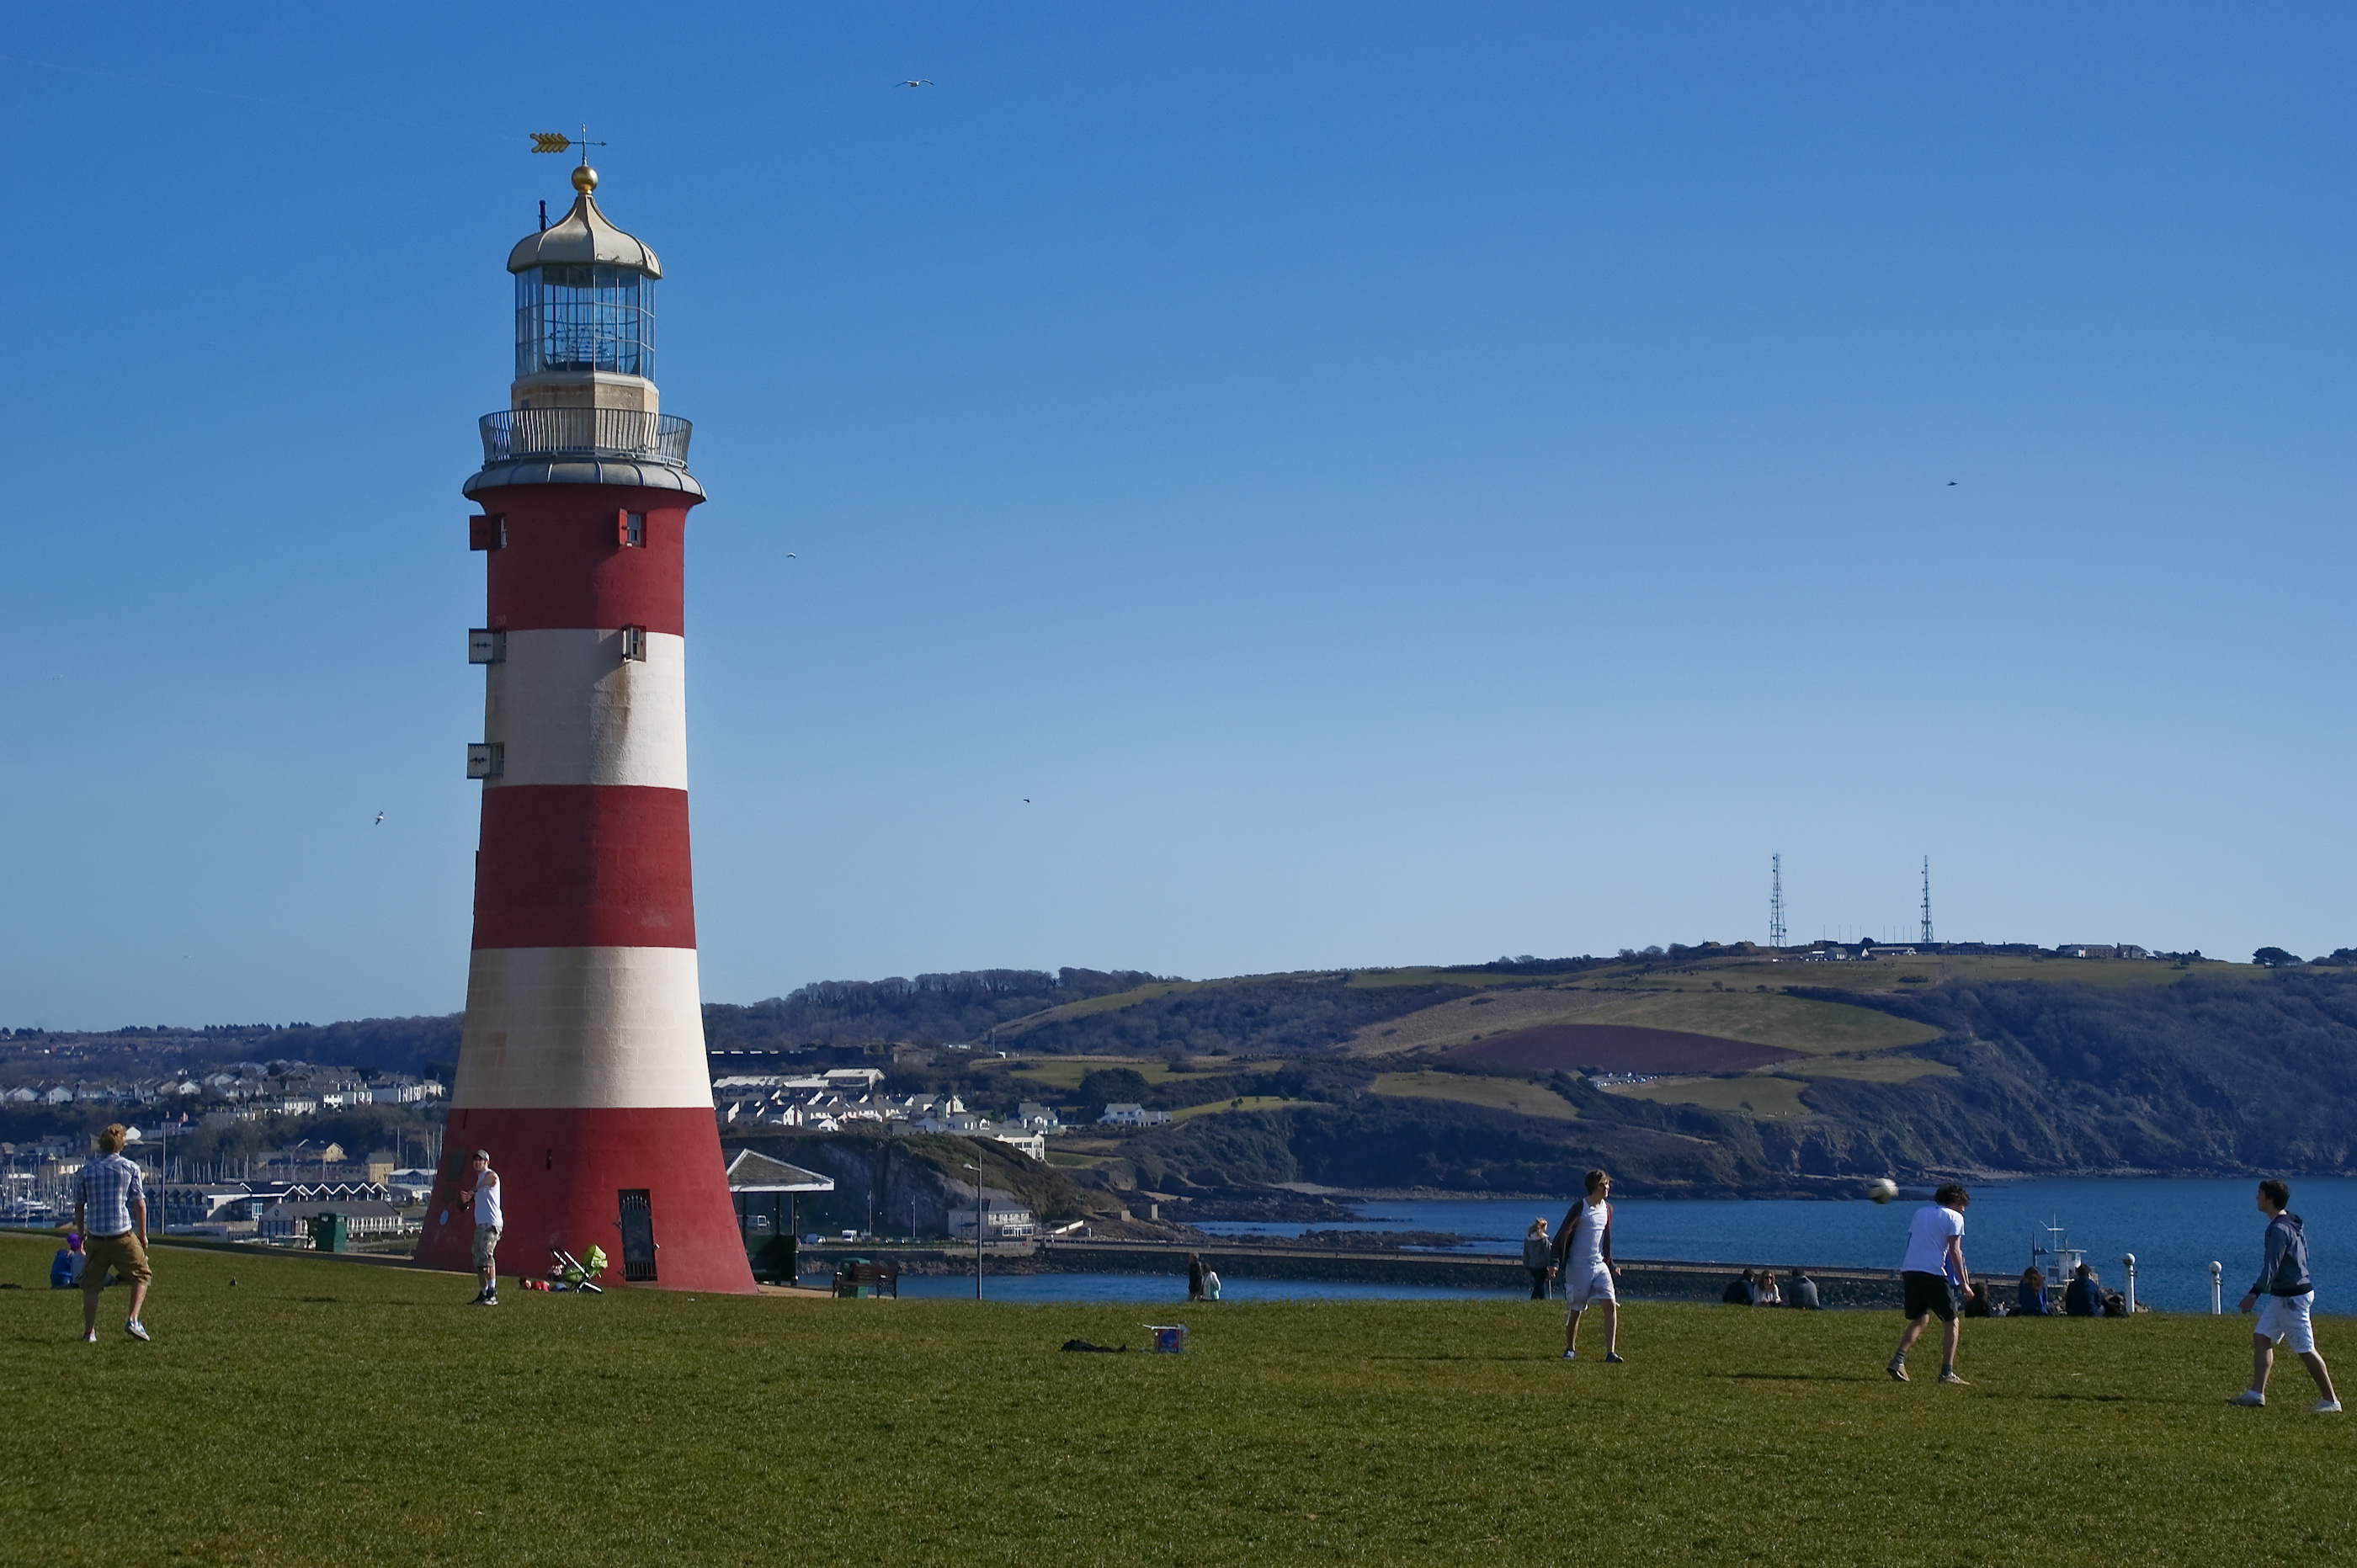 File:Smeatons tower - Plymouth Hoe.jpg - Wikimedia Commons